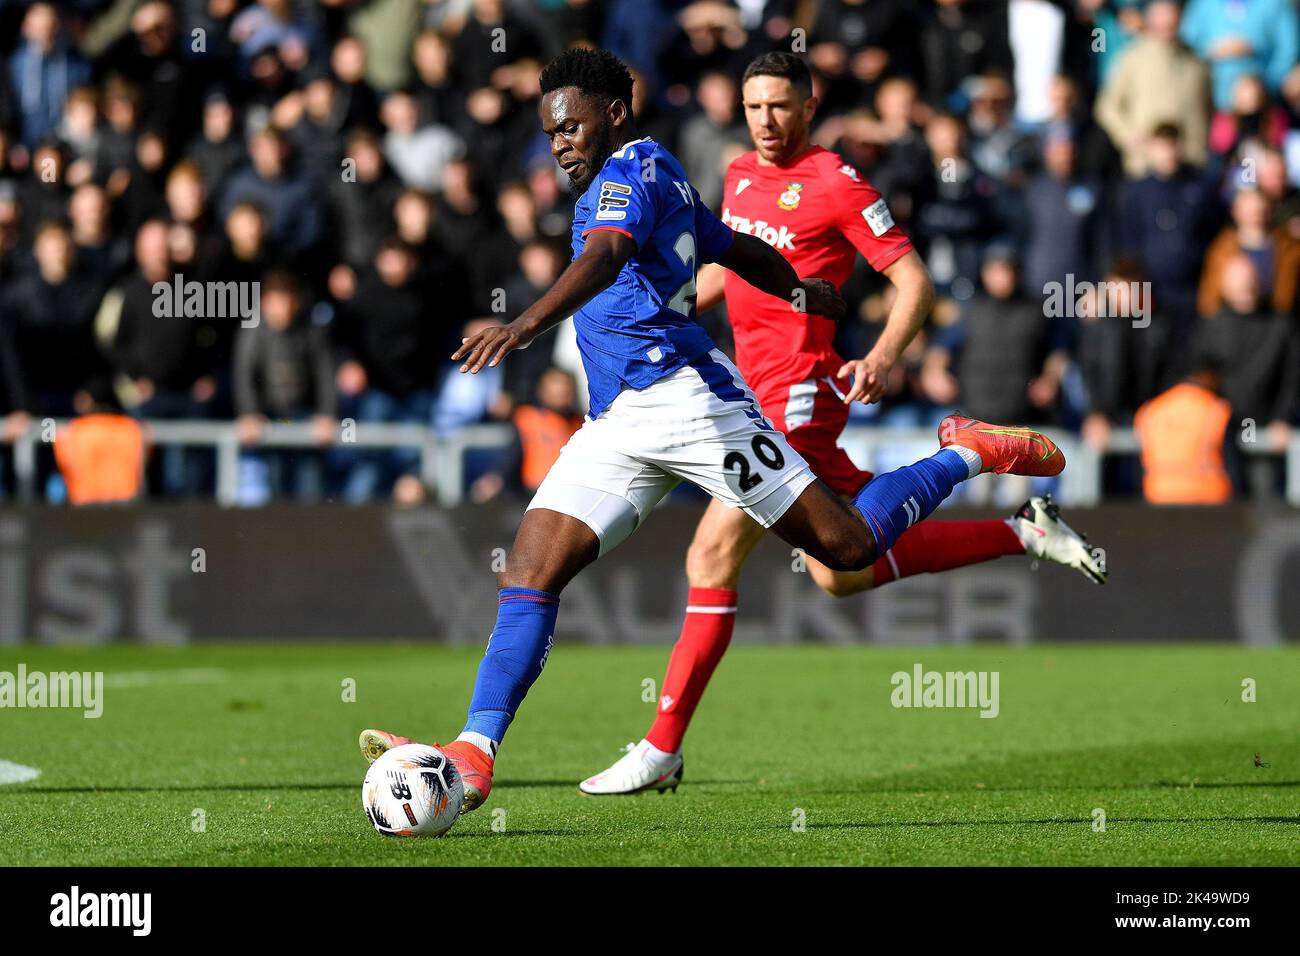 Oldham, UK. 1st October 2022during the Vanarama National League match between Oldham Athletic and Wrexham at Boundary Park, Oldham on Saturday 1st October 2022Mike Fondop-Talom of Oldham Athletic scores his side's first goal of the game during the Vanarama National League match between Oldham Athletic and Wrexham at Boundary Park, Oldham on Saturday 1st October 2022. Credit: MI News & Sport /Alamy Live News Stock Photo